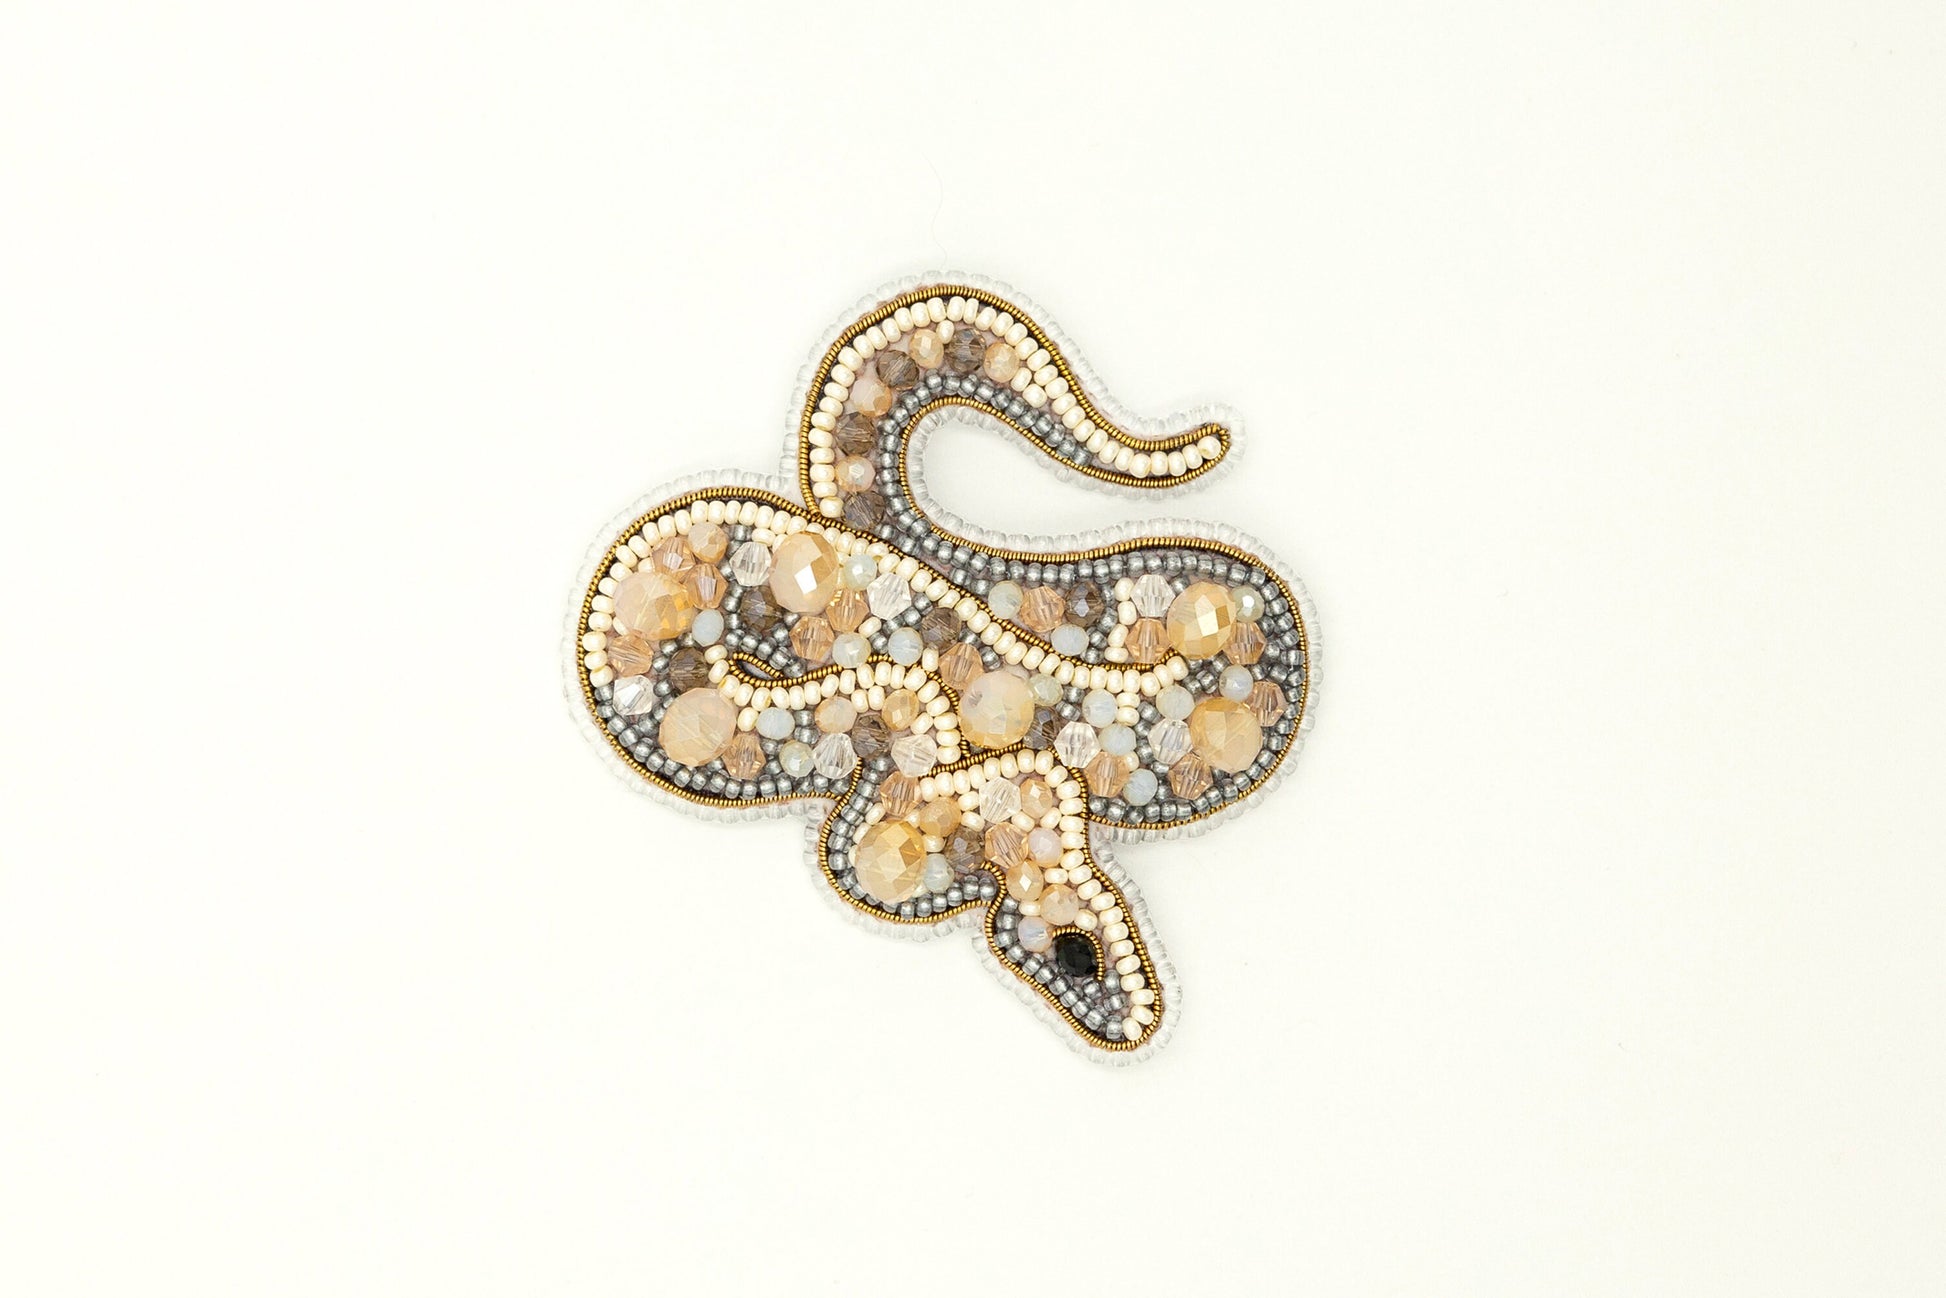 a brooch with a snake design on it